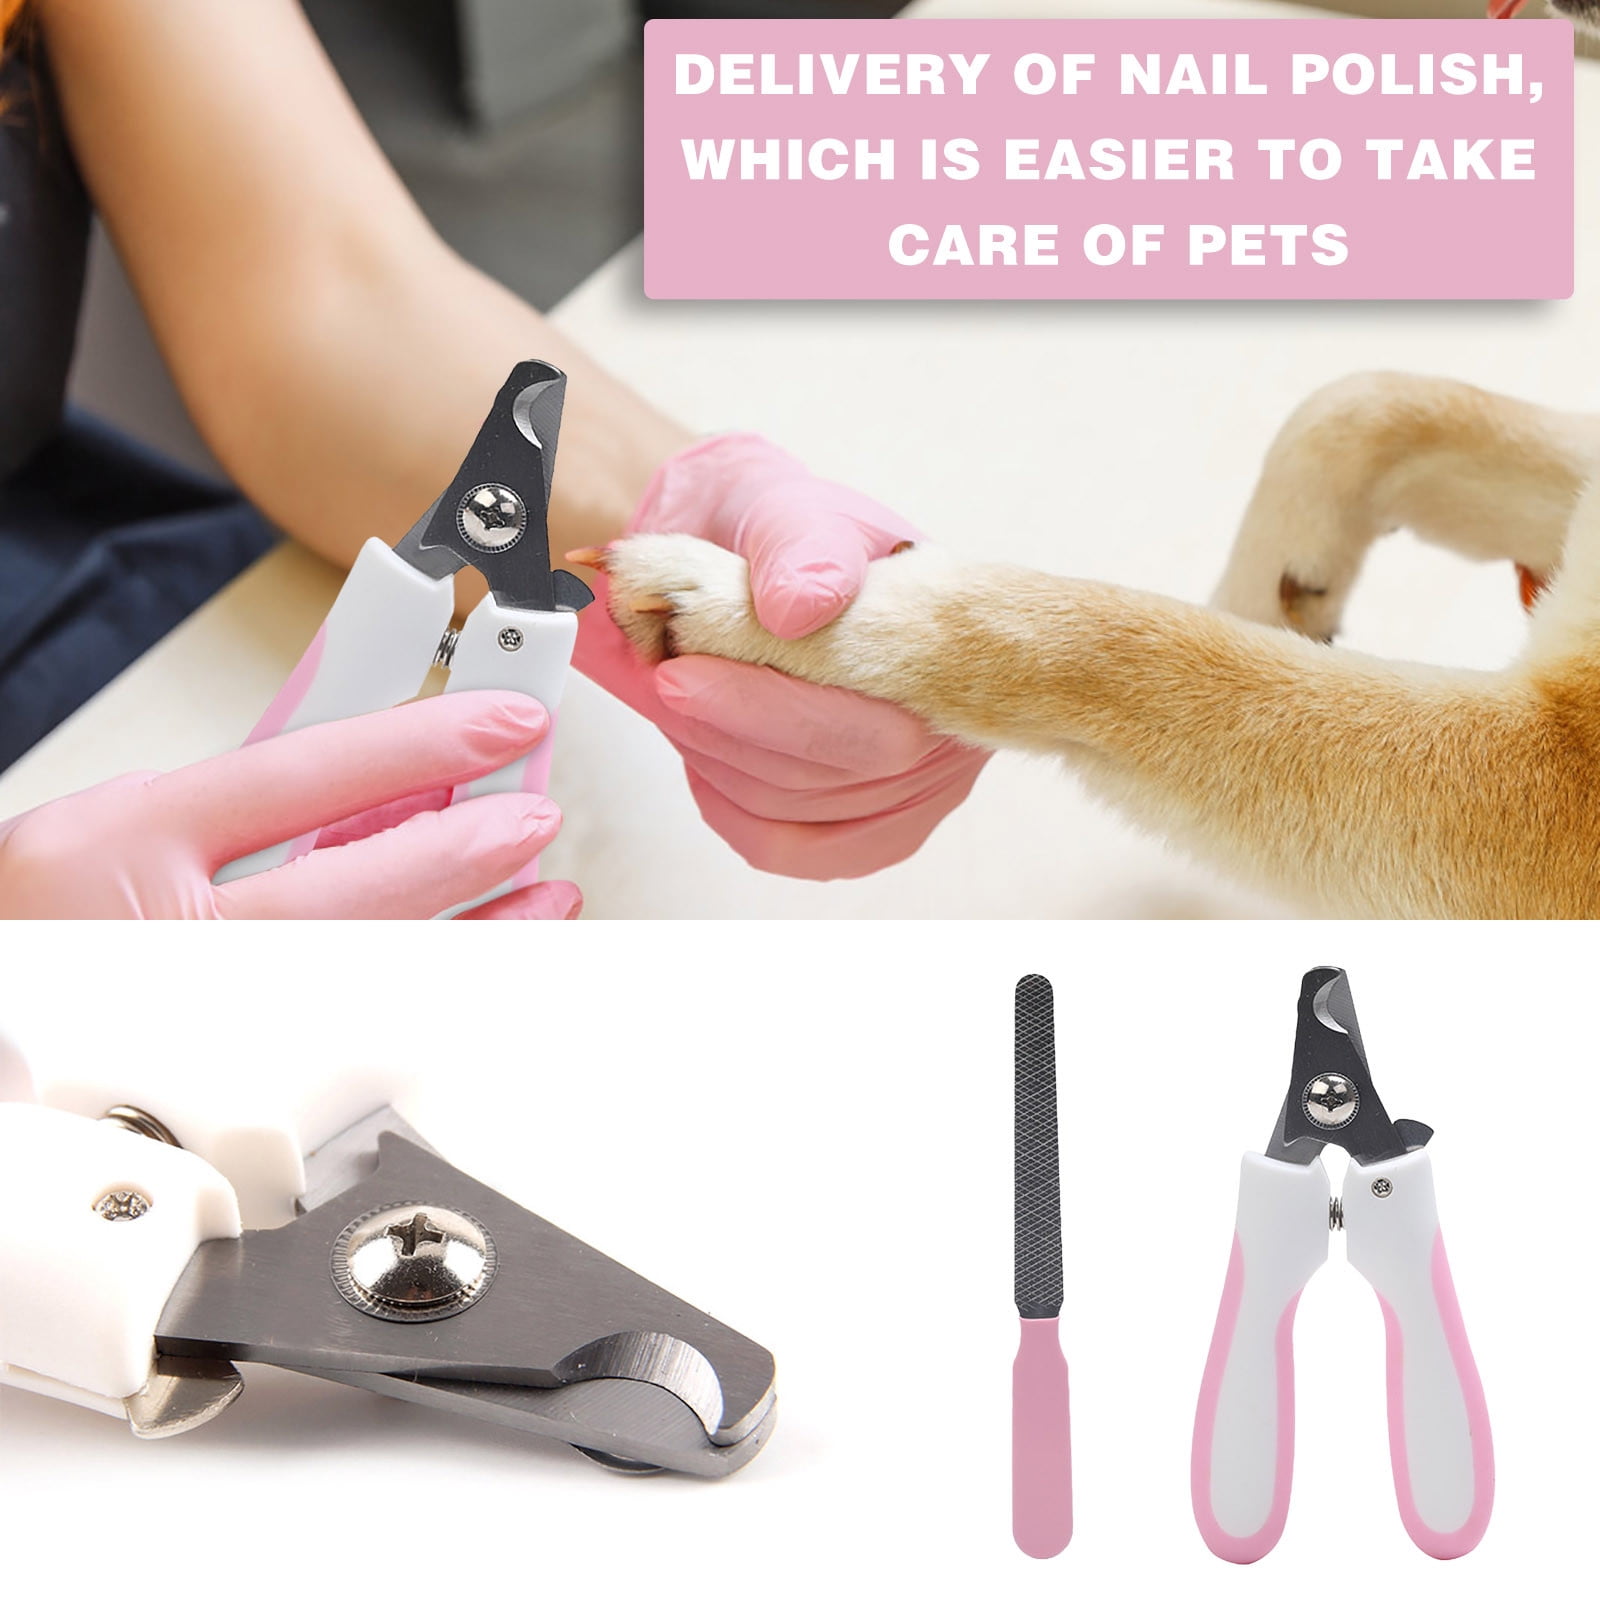 What are the best type of nail clippers for dogs? - Quora